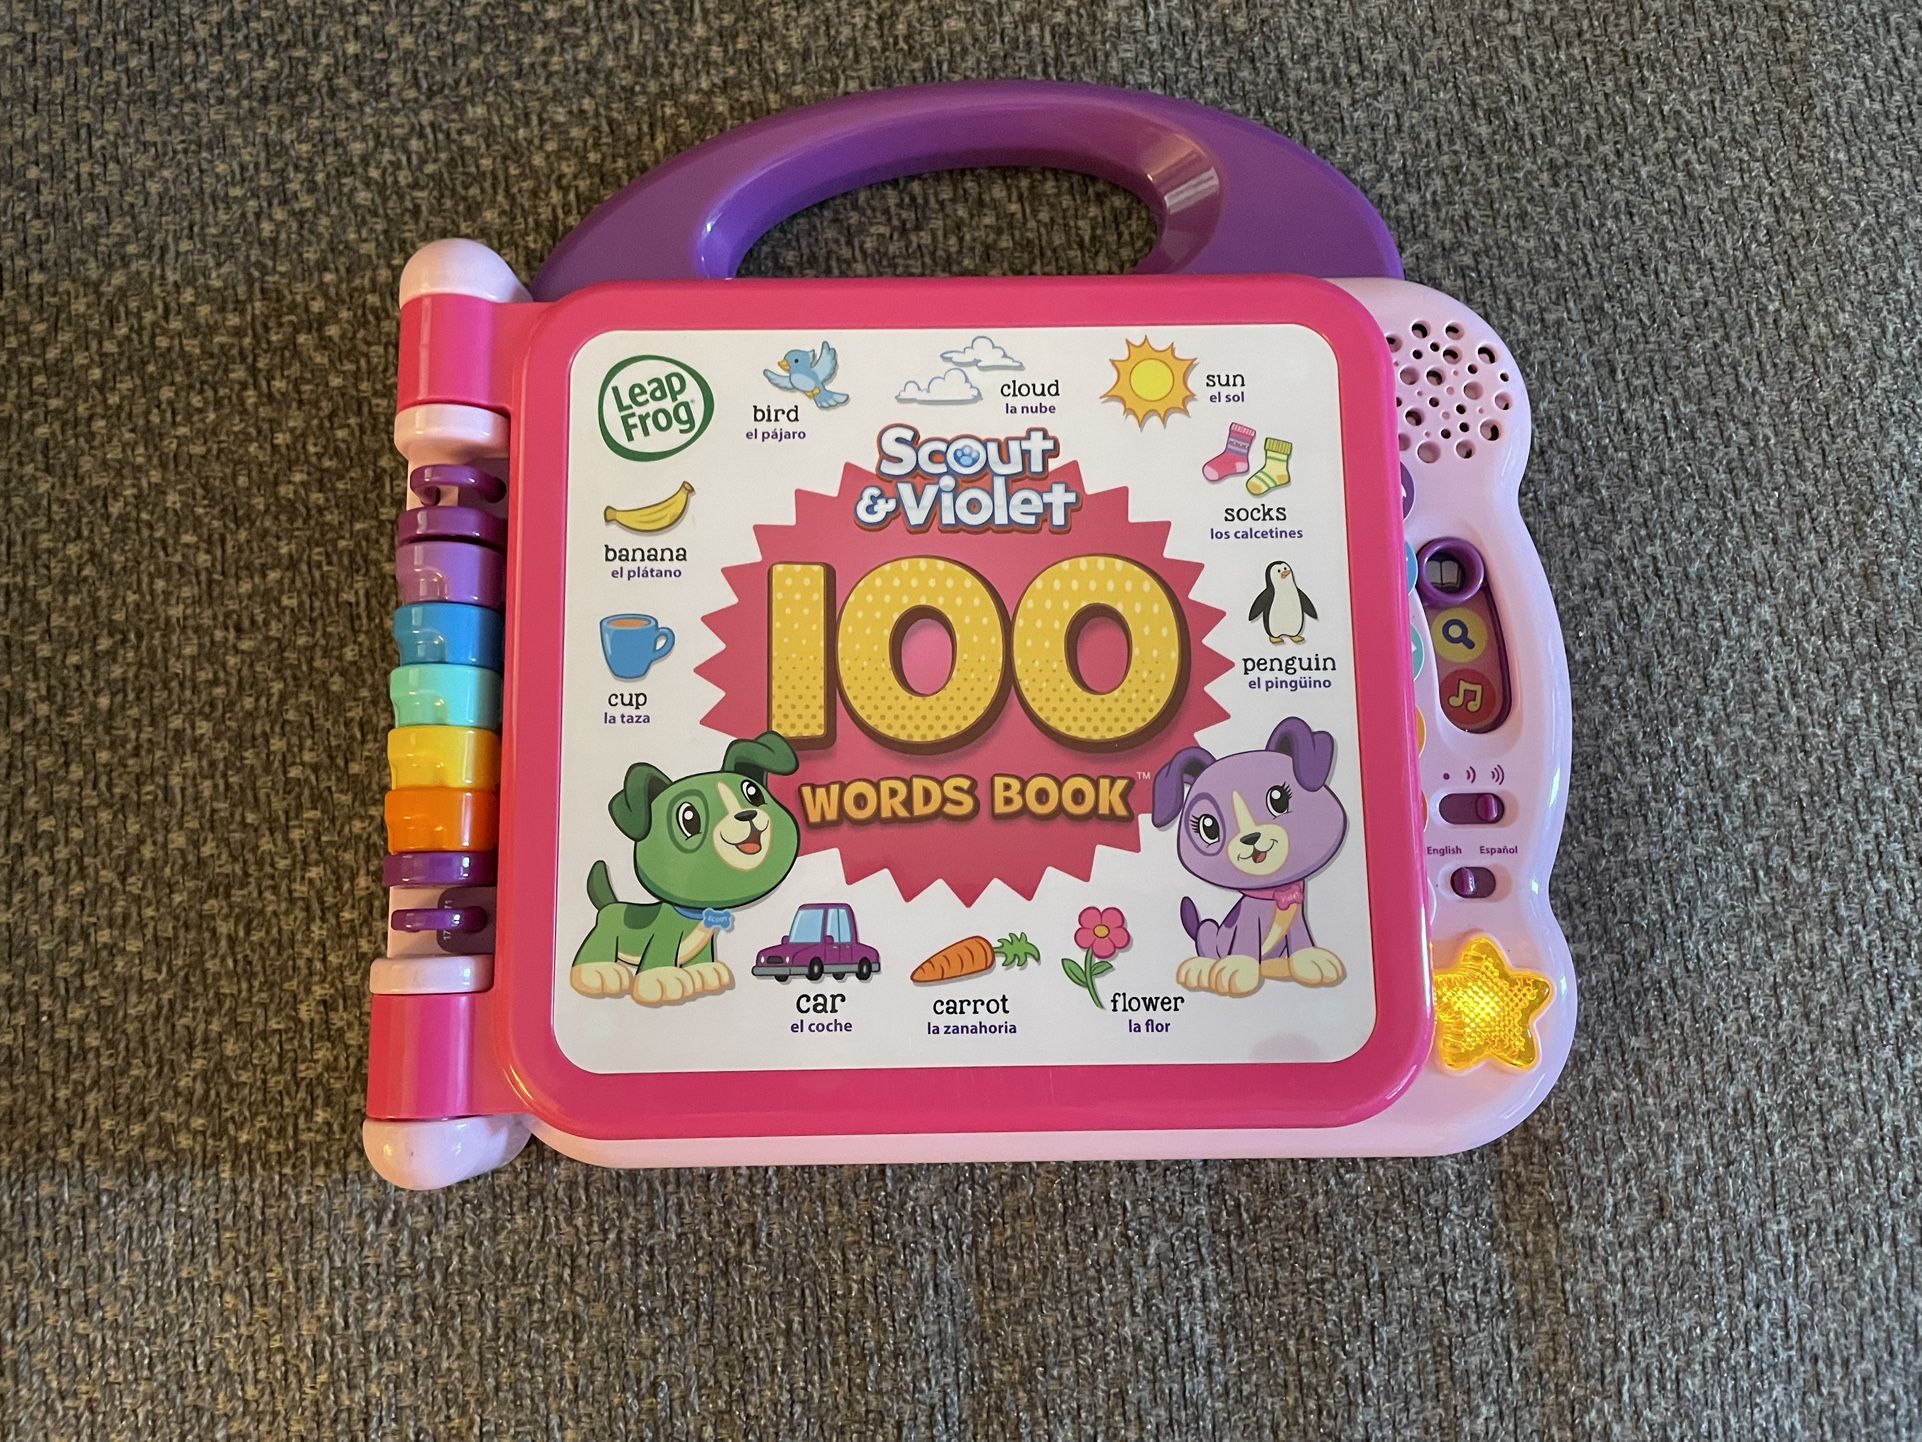 LeapFrog Scout and Violet 100 Words Book Toy